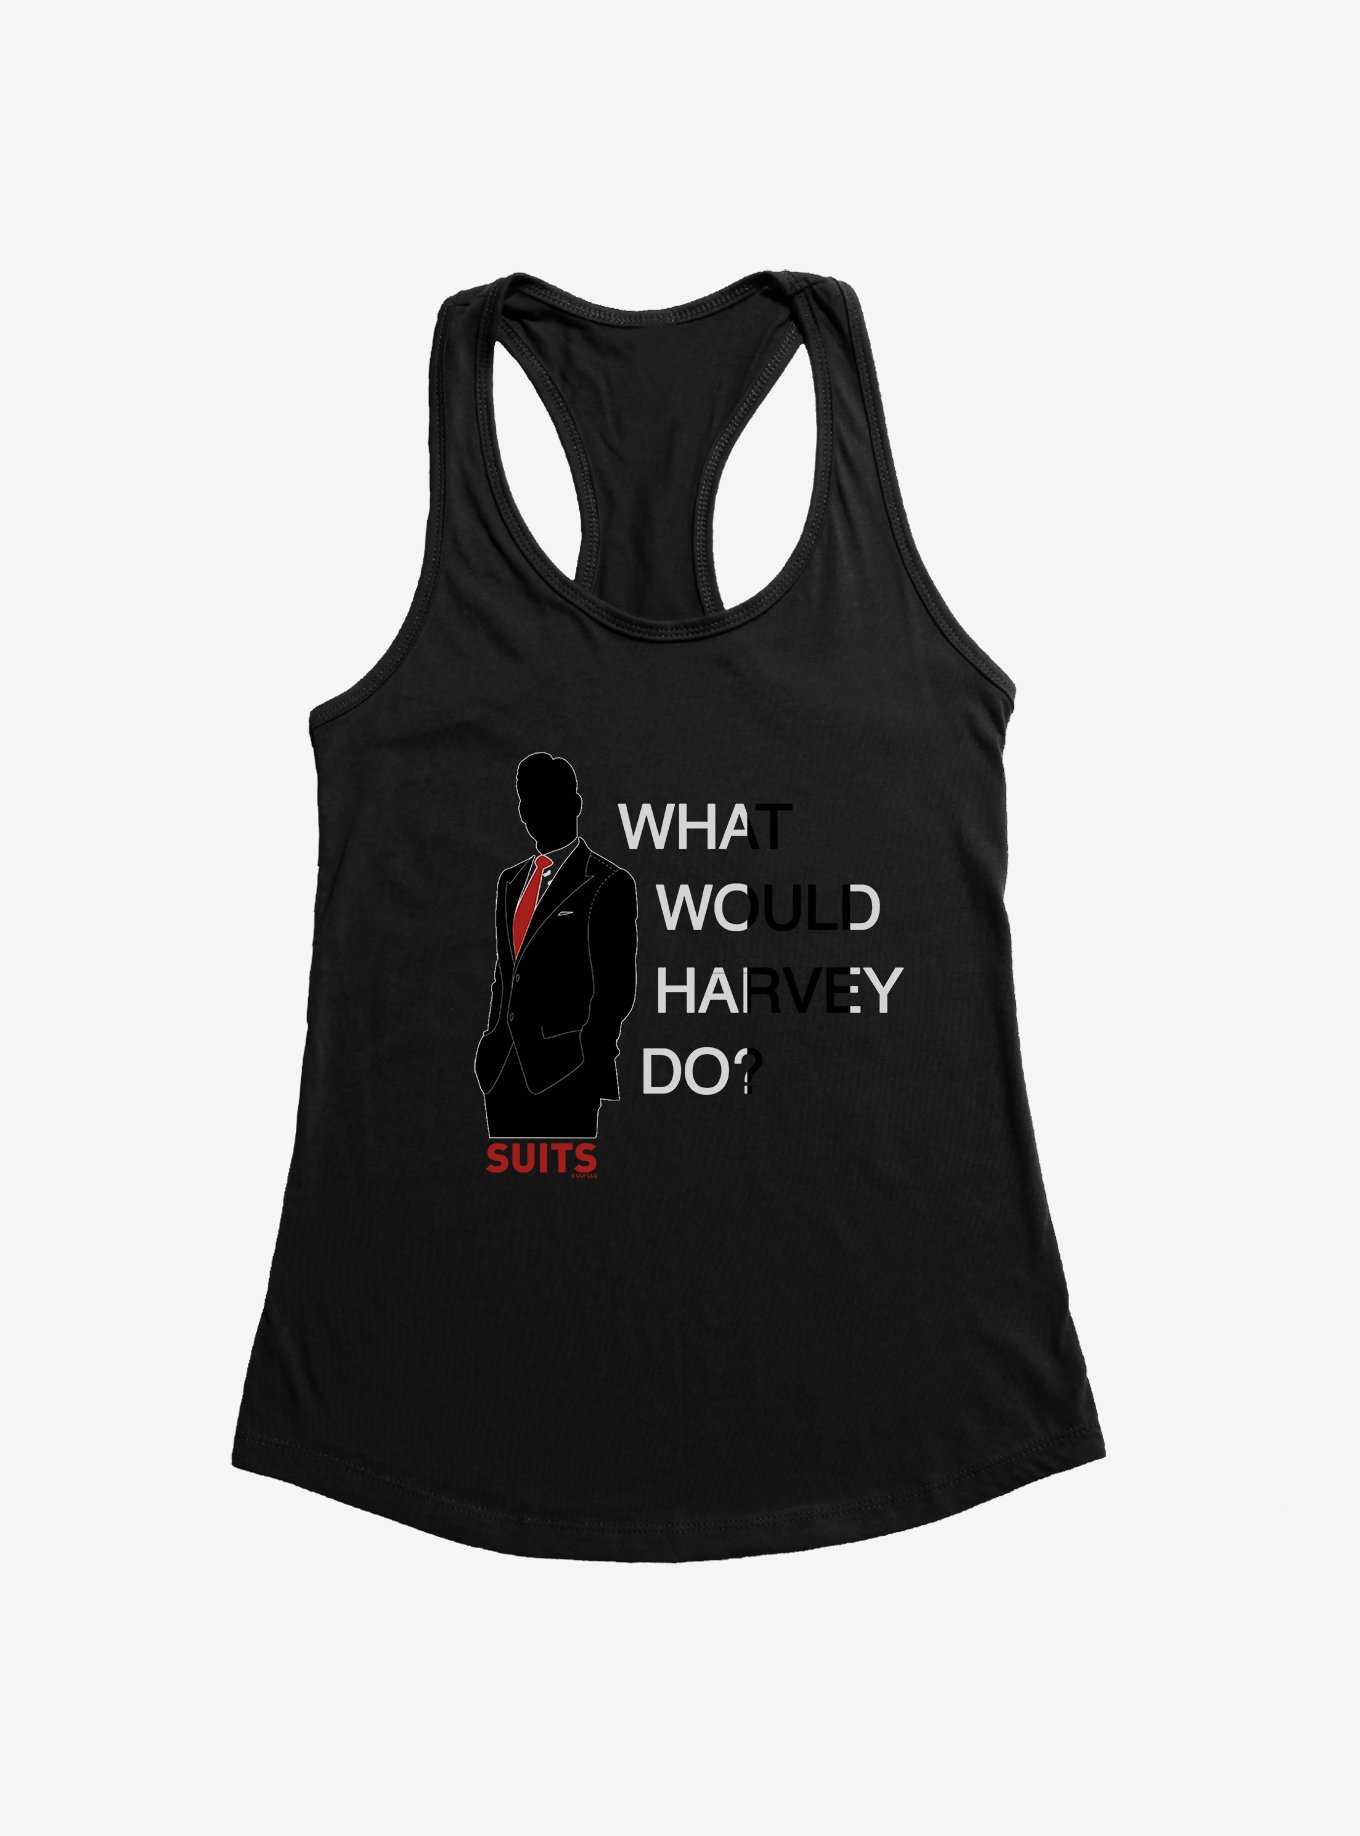 Suits What Would Harvey Do? Girls Tank, , hi-res